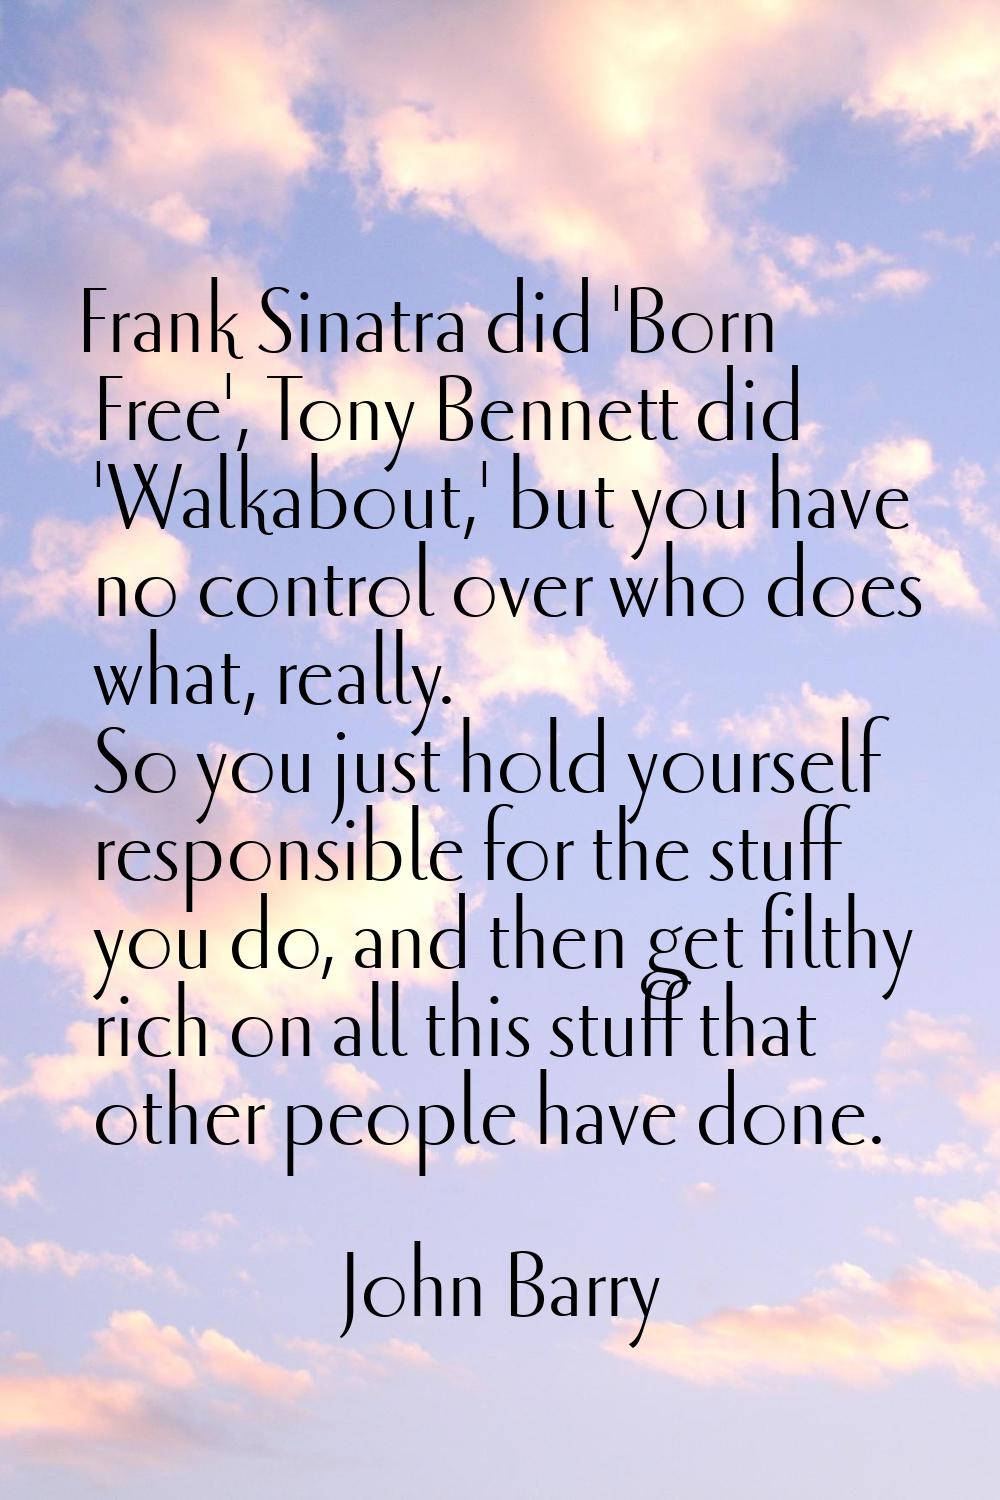 Frank Sinatra did 'Born Free', Tony Bennett did 'Walkabout,' but you have no control over who does 